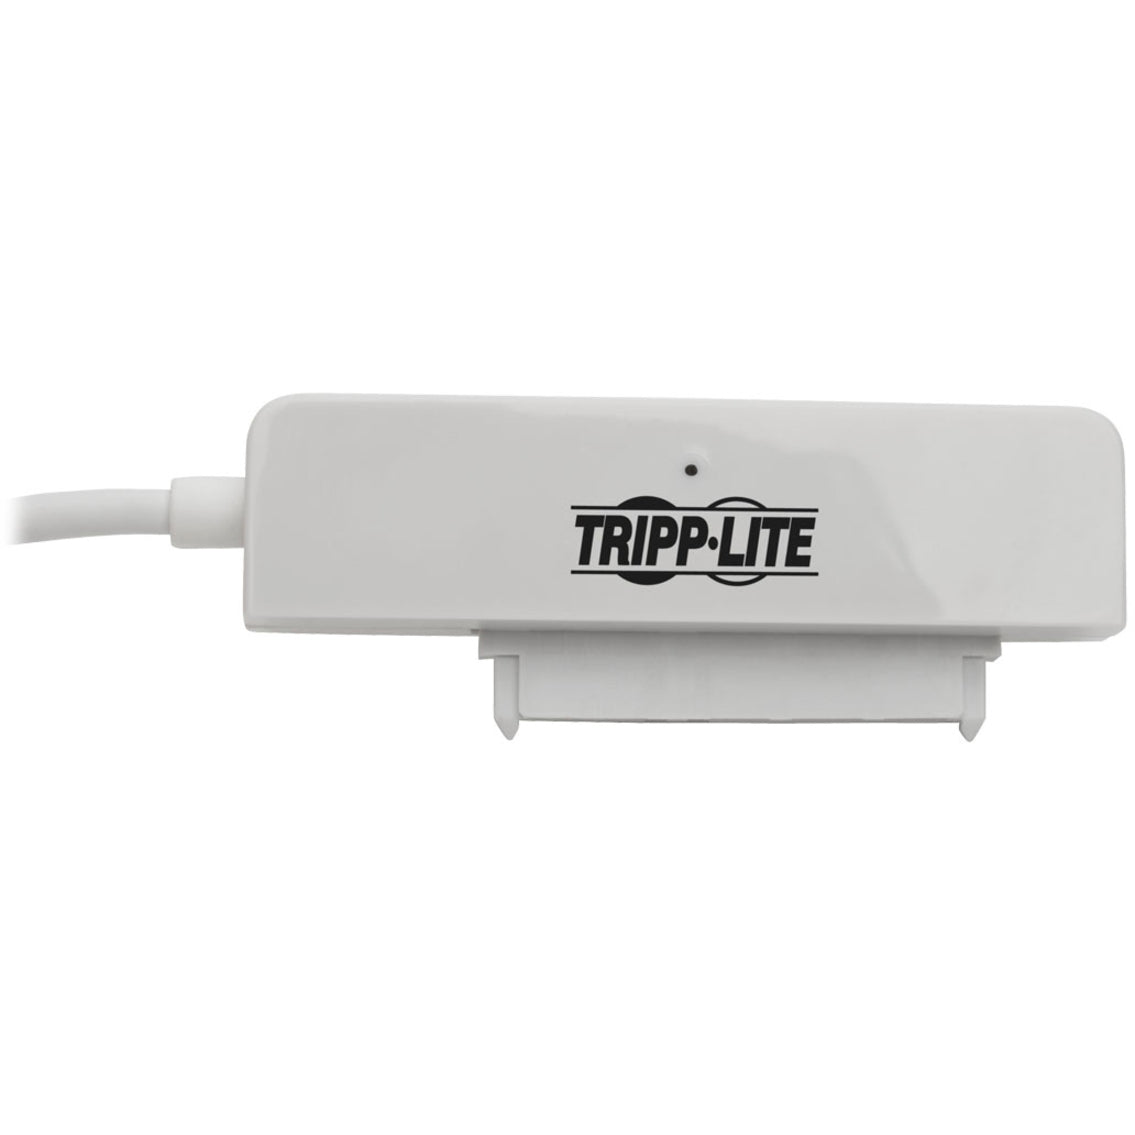 Tripp Lite U338-06N-SATA-W USB 3.0 SuperSpeed to SATA III Adapter Cable, White - Fast Data Transfer for Hard Drives and SSDs